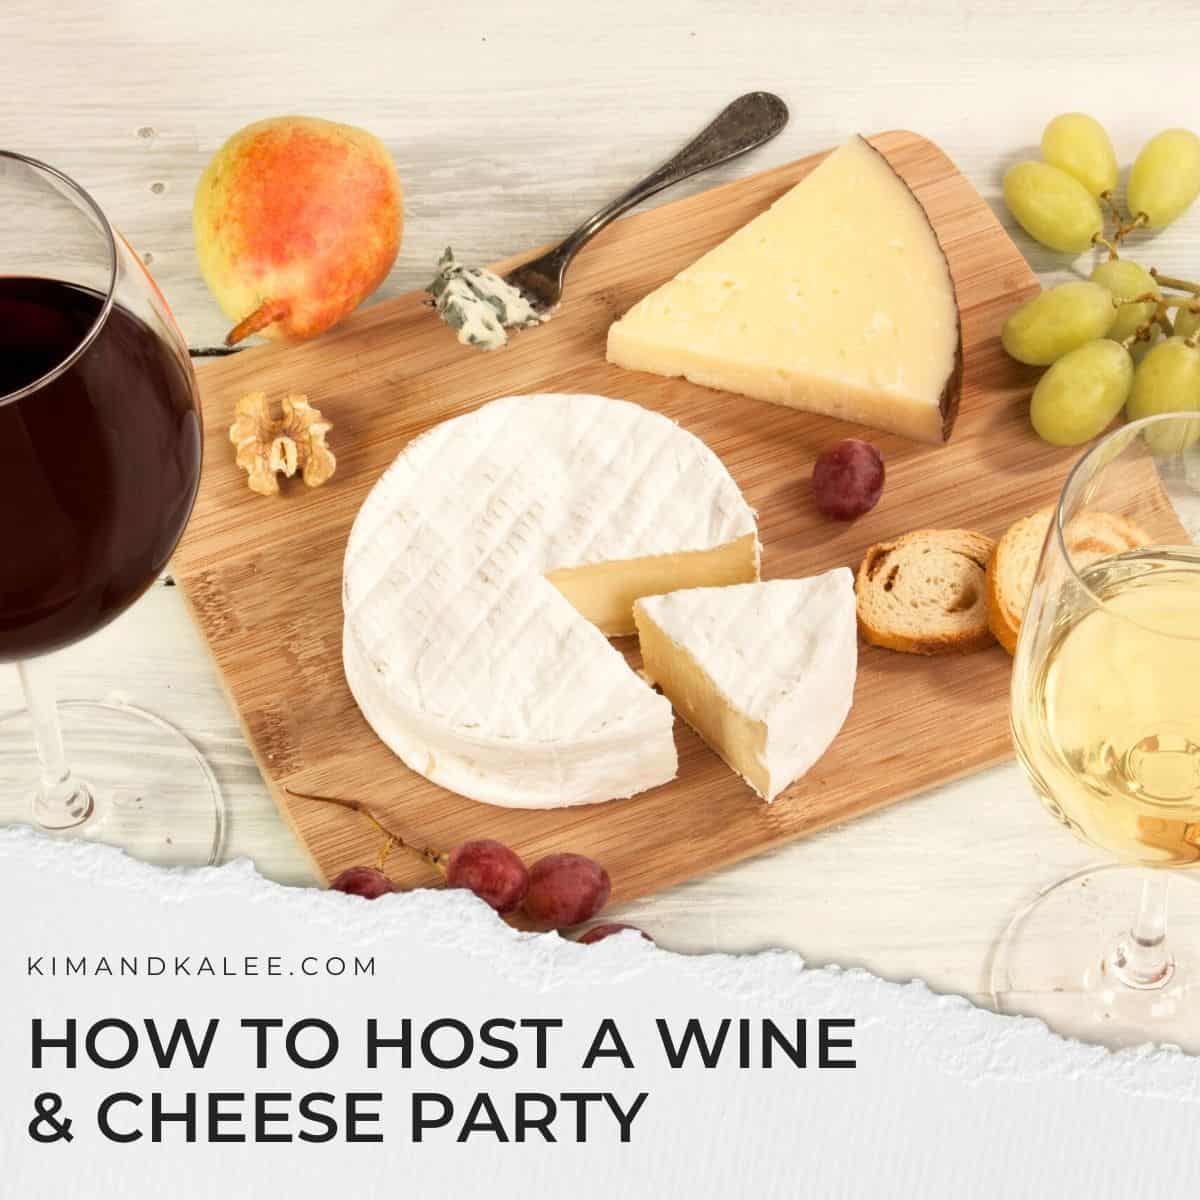 blocks of cheese with red and white wines with the text overlay "how to host a wine and cheese party"